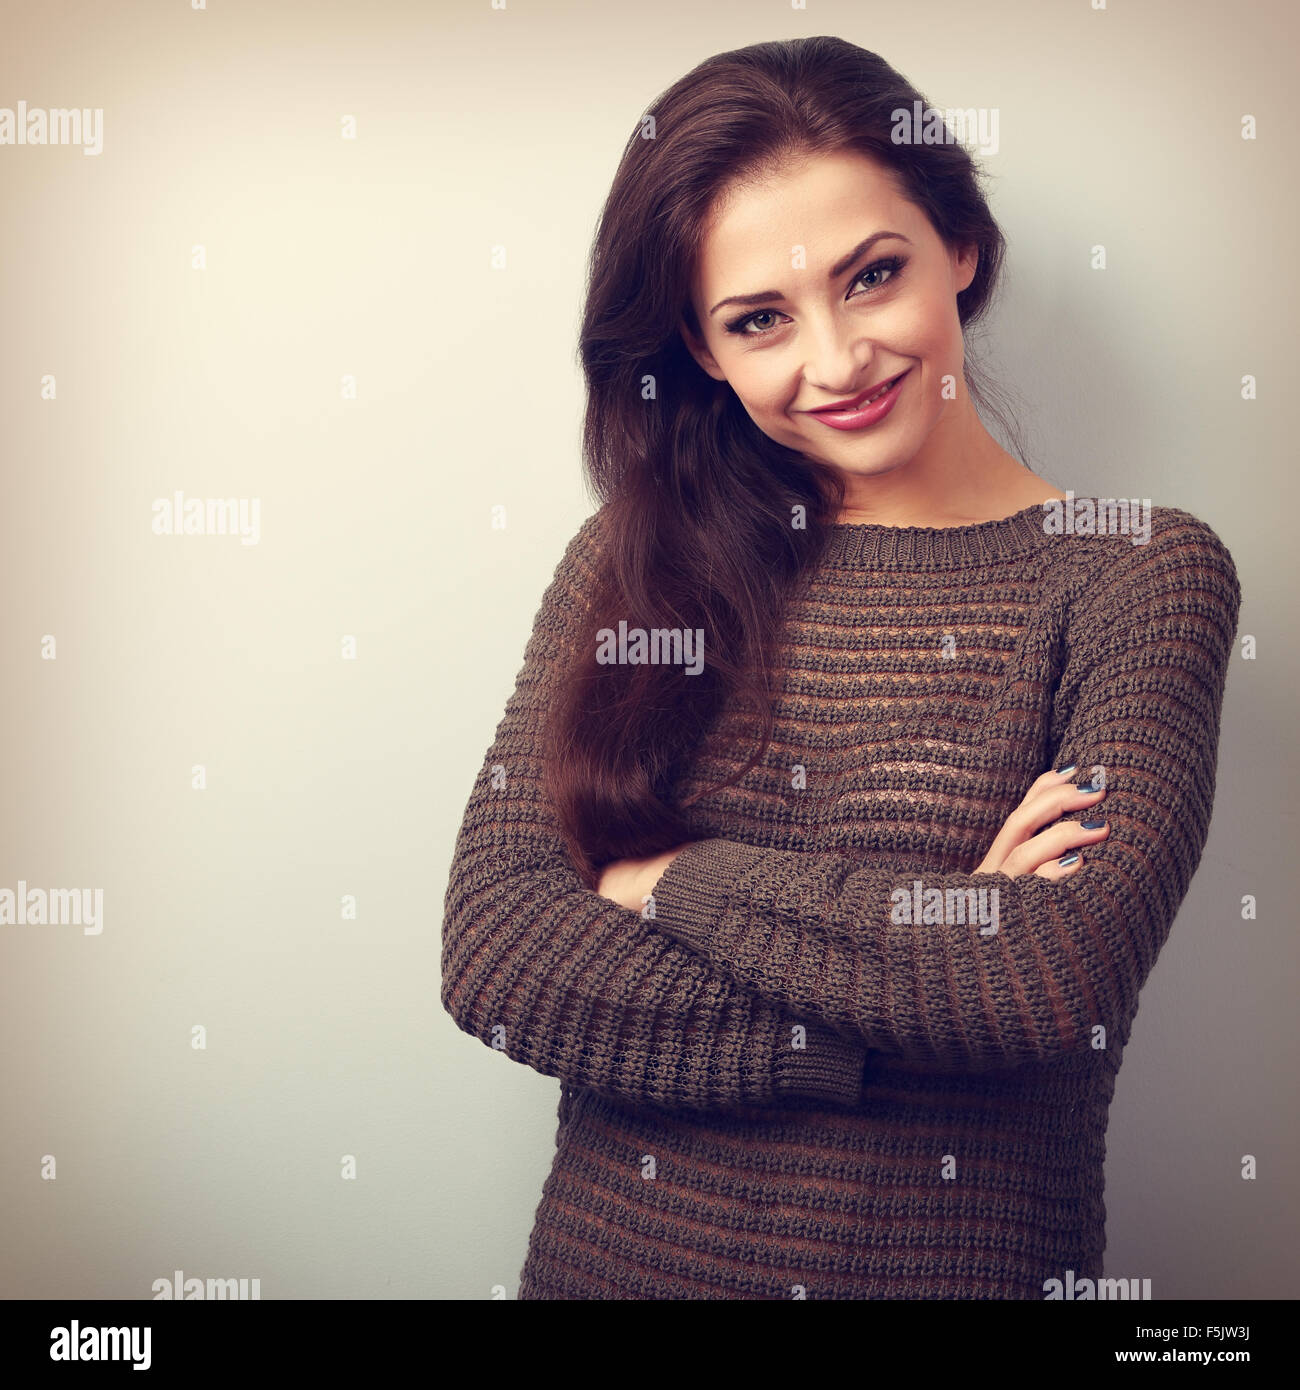 Happy young brunette woman smiling in warm sweater. Vintage portrait Stock Photo